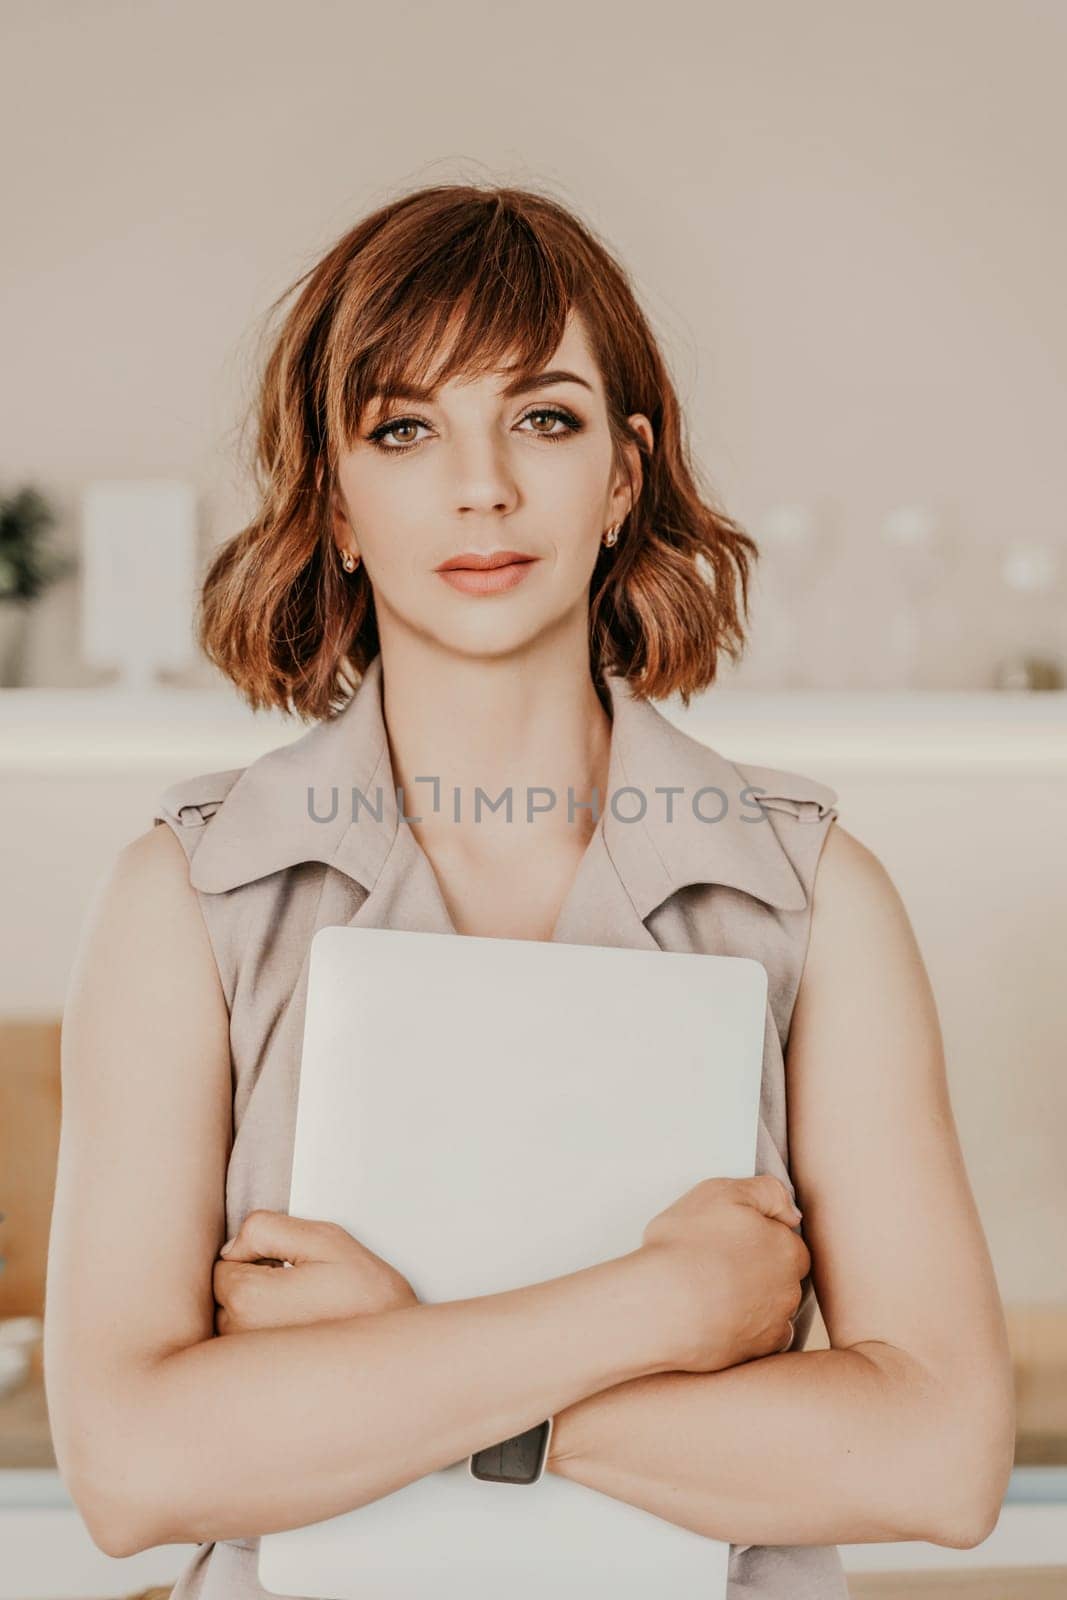 Brunette macbook. Portrait of a woman, she holds a mabuk in her hands and looks at the camera, wearing a beige dress on a beige background. by Matiunina